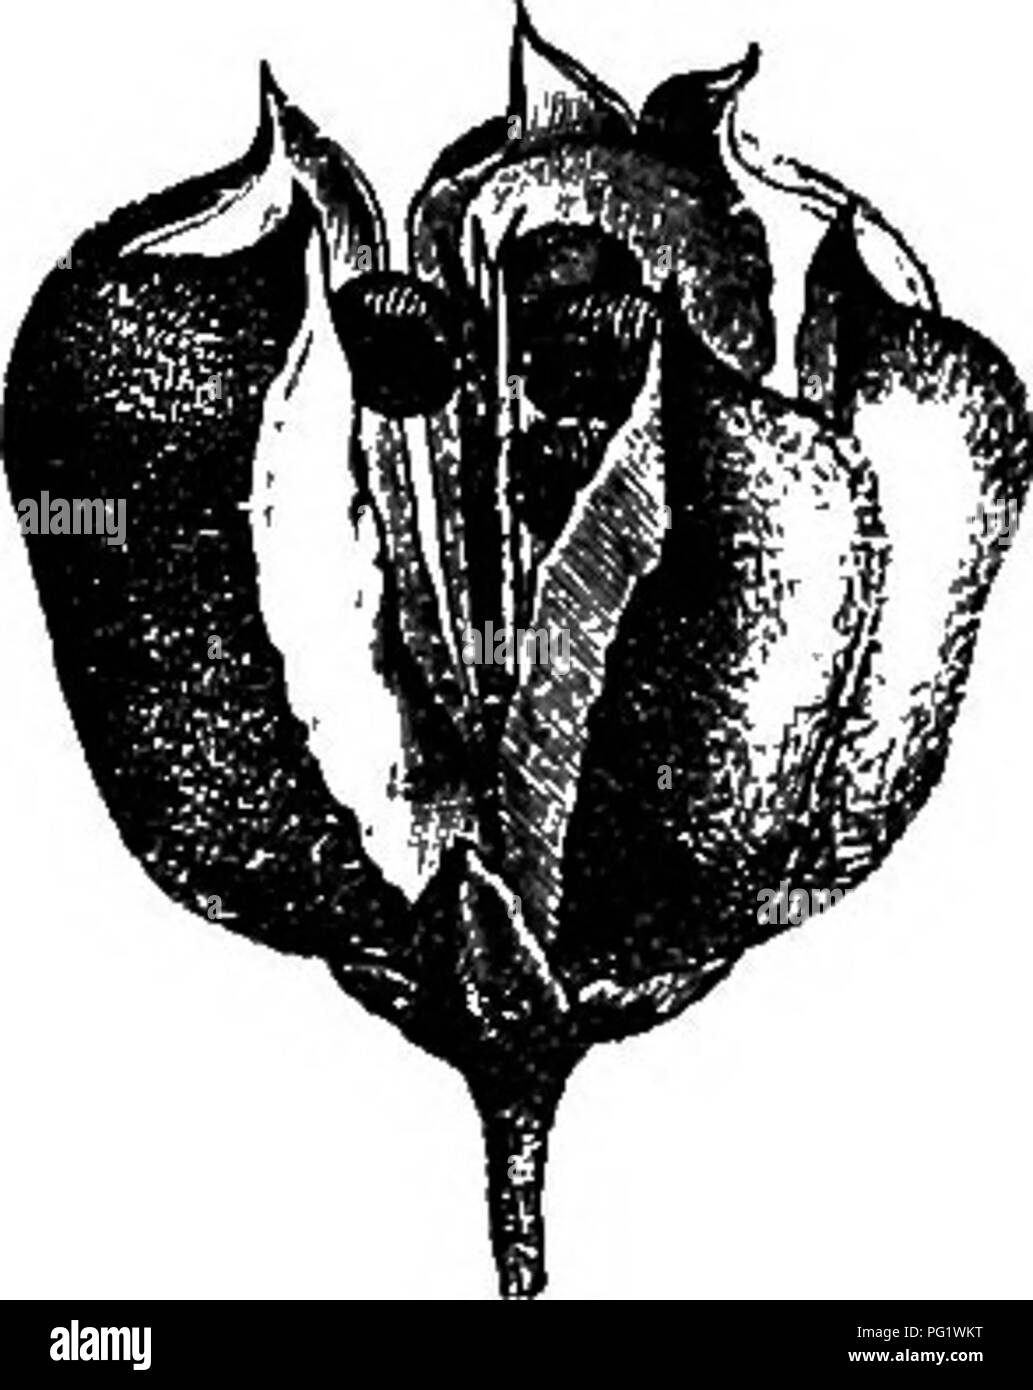 . The natural history of plants. Botany. Fig. 395. Male flower with Fig. 397. Seed (f). Fig. 398. Longitudinal Fig. 396. Fruit. Sie perianth removed. section of seed. finally from the columella. Sometimes the coat is nearly woody; some- times, as in the Malagash species, it is vesiculate and coloured. In this case Cossignia completely represents the irregular form of Har- pullia ; the exarillate and exalbuminous seeds have an embryo rolled up like that of Koelreuieria (fig. 398). The leaves are imparipinnate or trifoliolate. Loxodiscus^ a shrub from New Caledonia, is closely allied to the prec Stock Photo